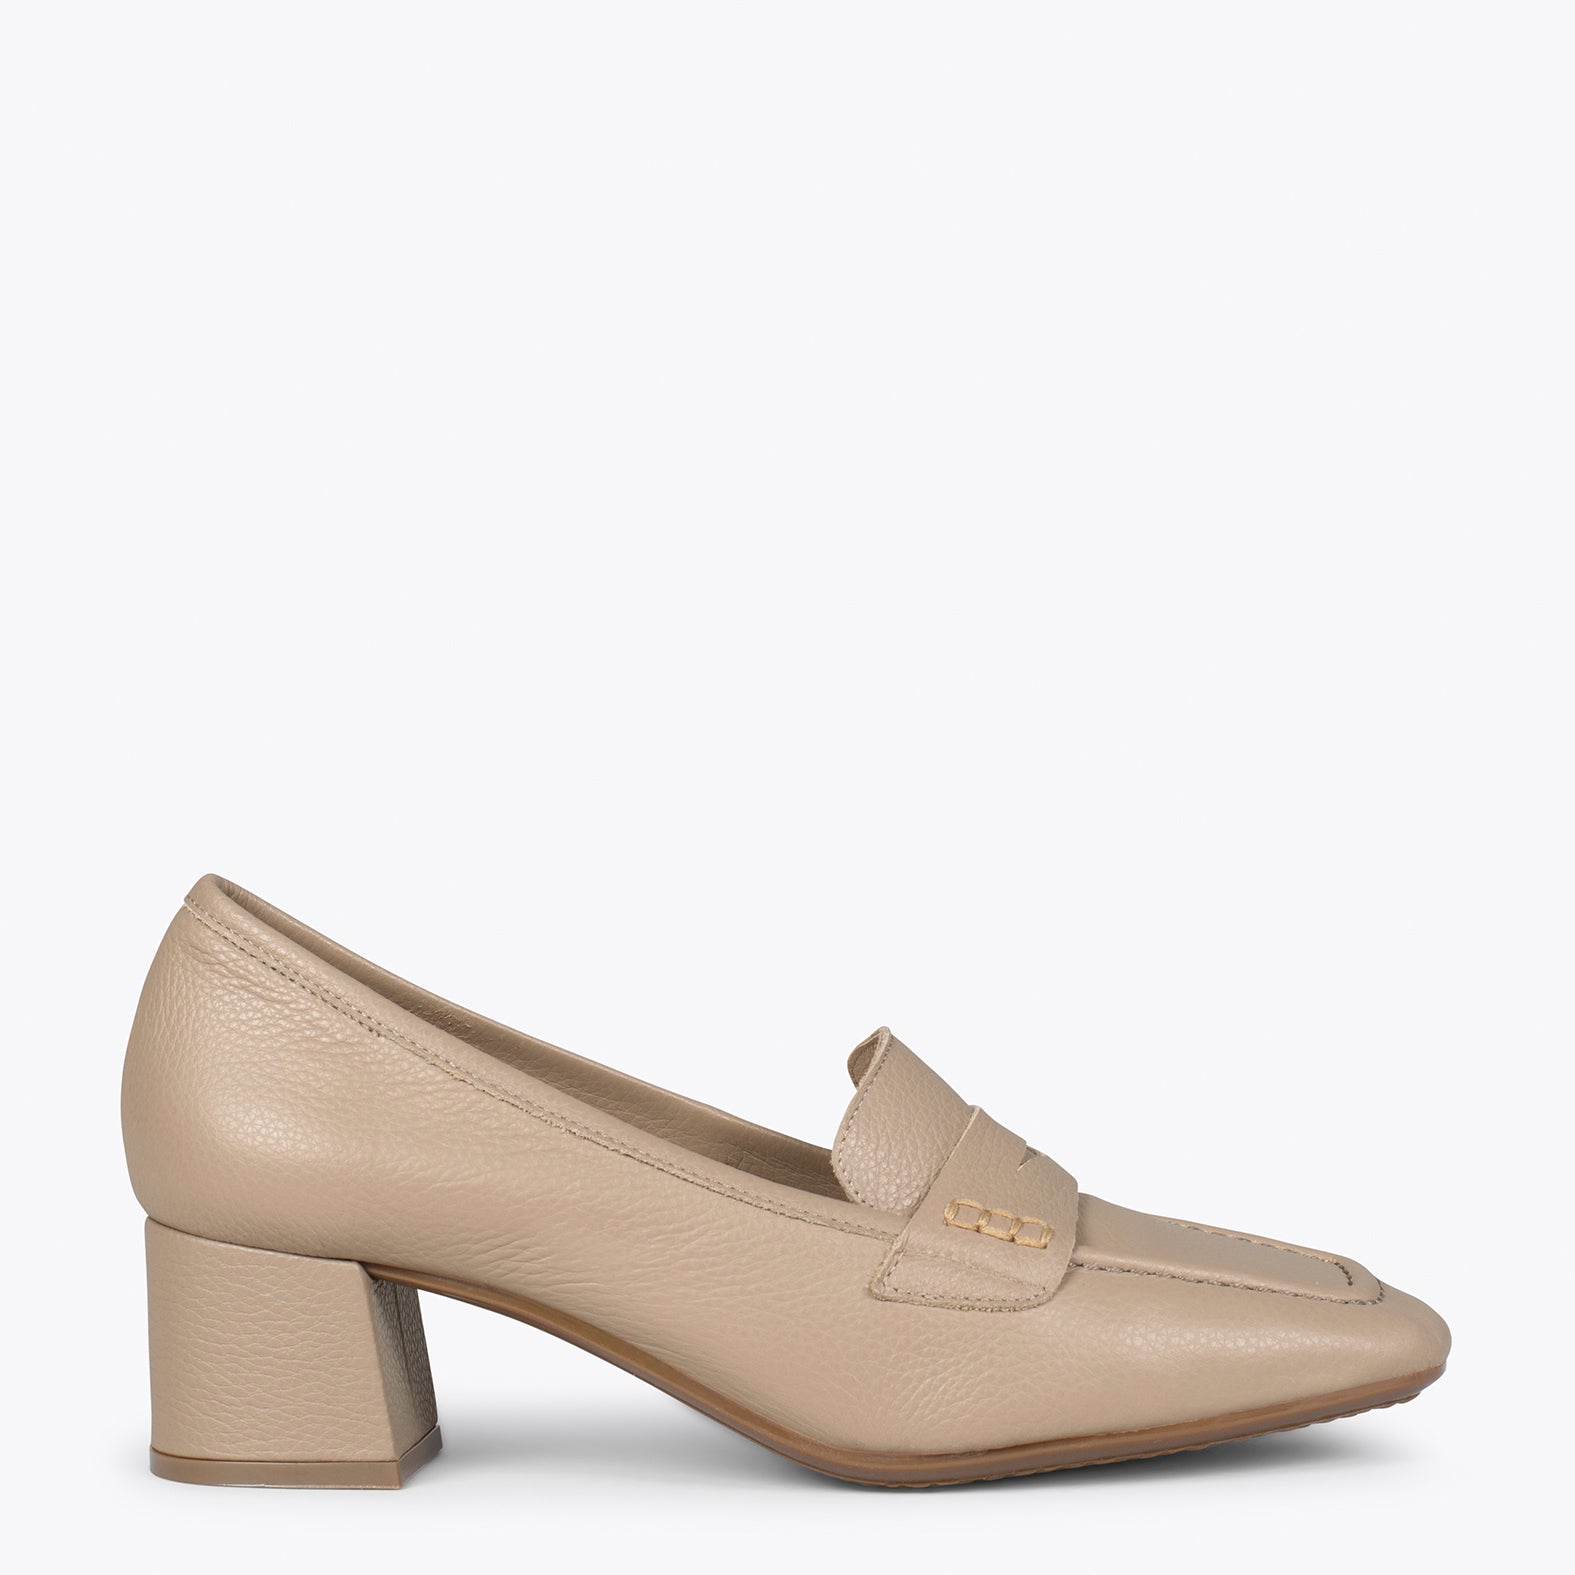 MASK HEEL - TAUPE women's loafers with heel and mask